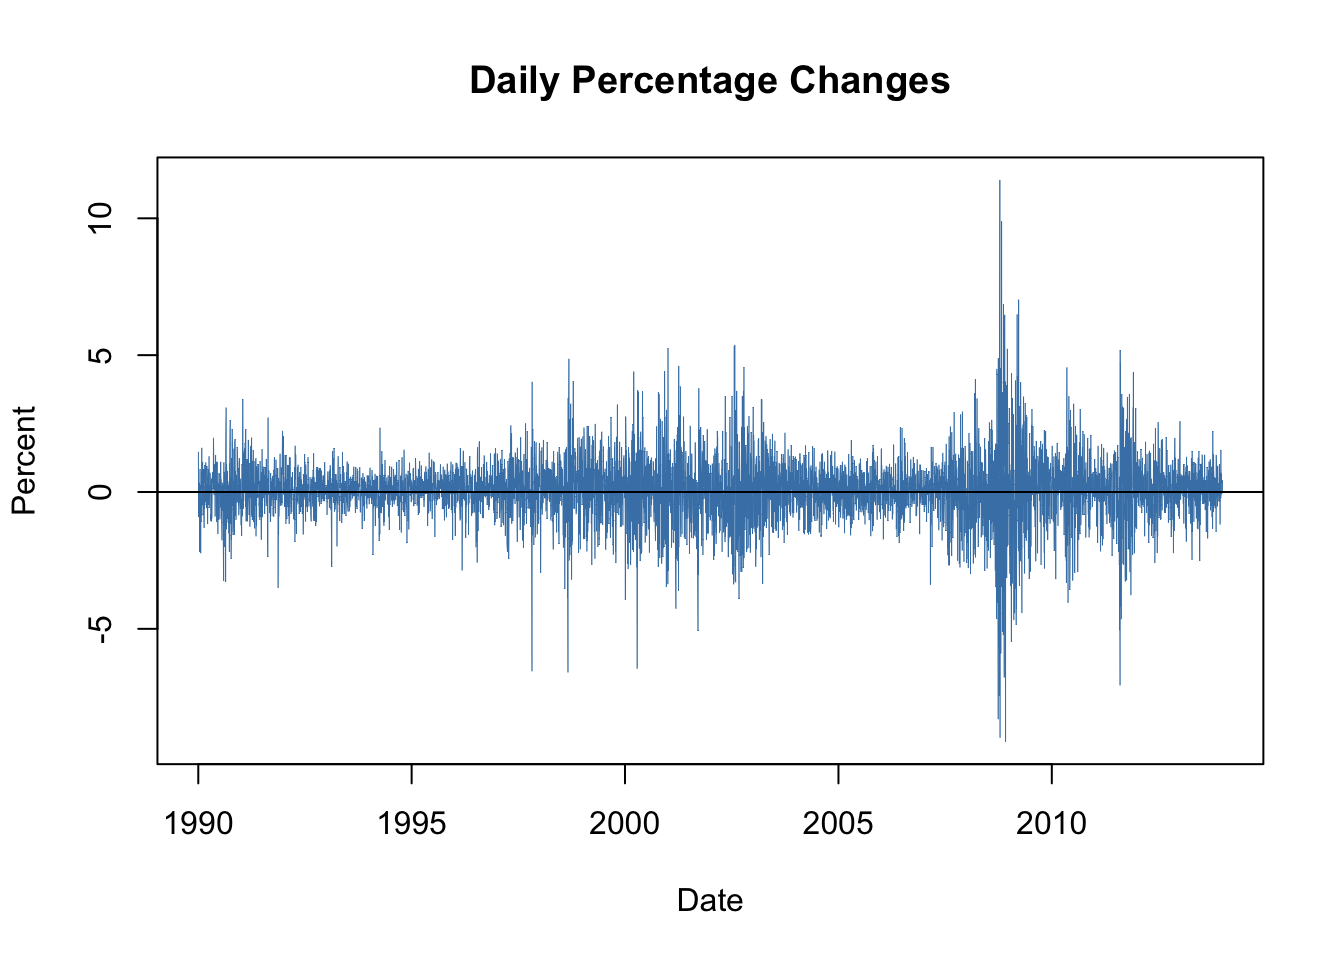 Daily Percentage Returns in the Wilshire 5000 Index